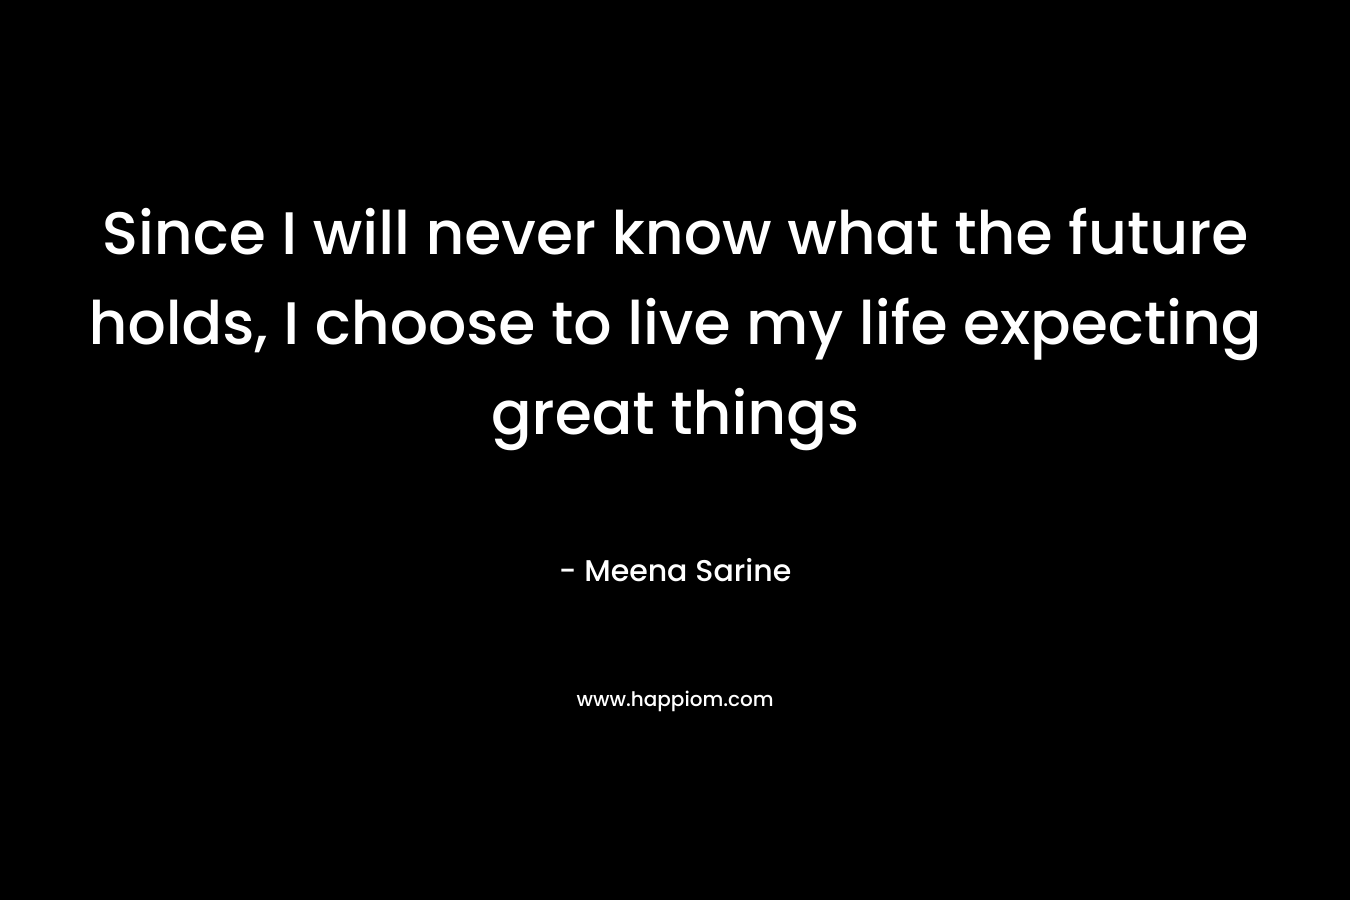 Since I will never know what the future holds, I choose to live my life expecting great things – Meena Sarine